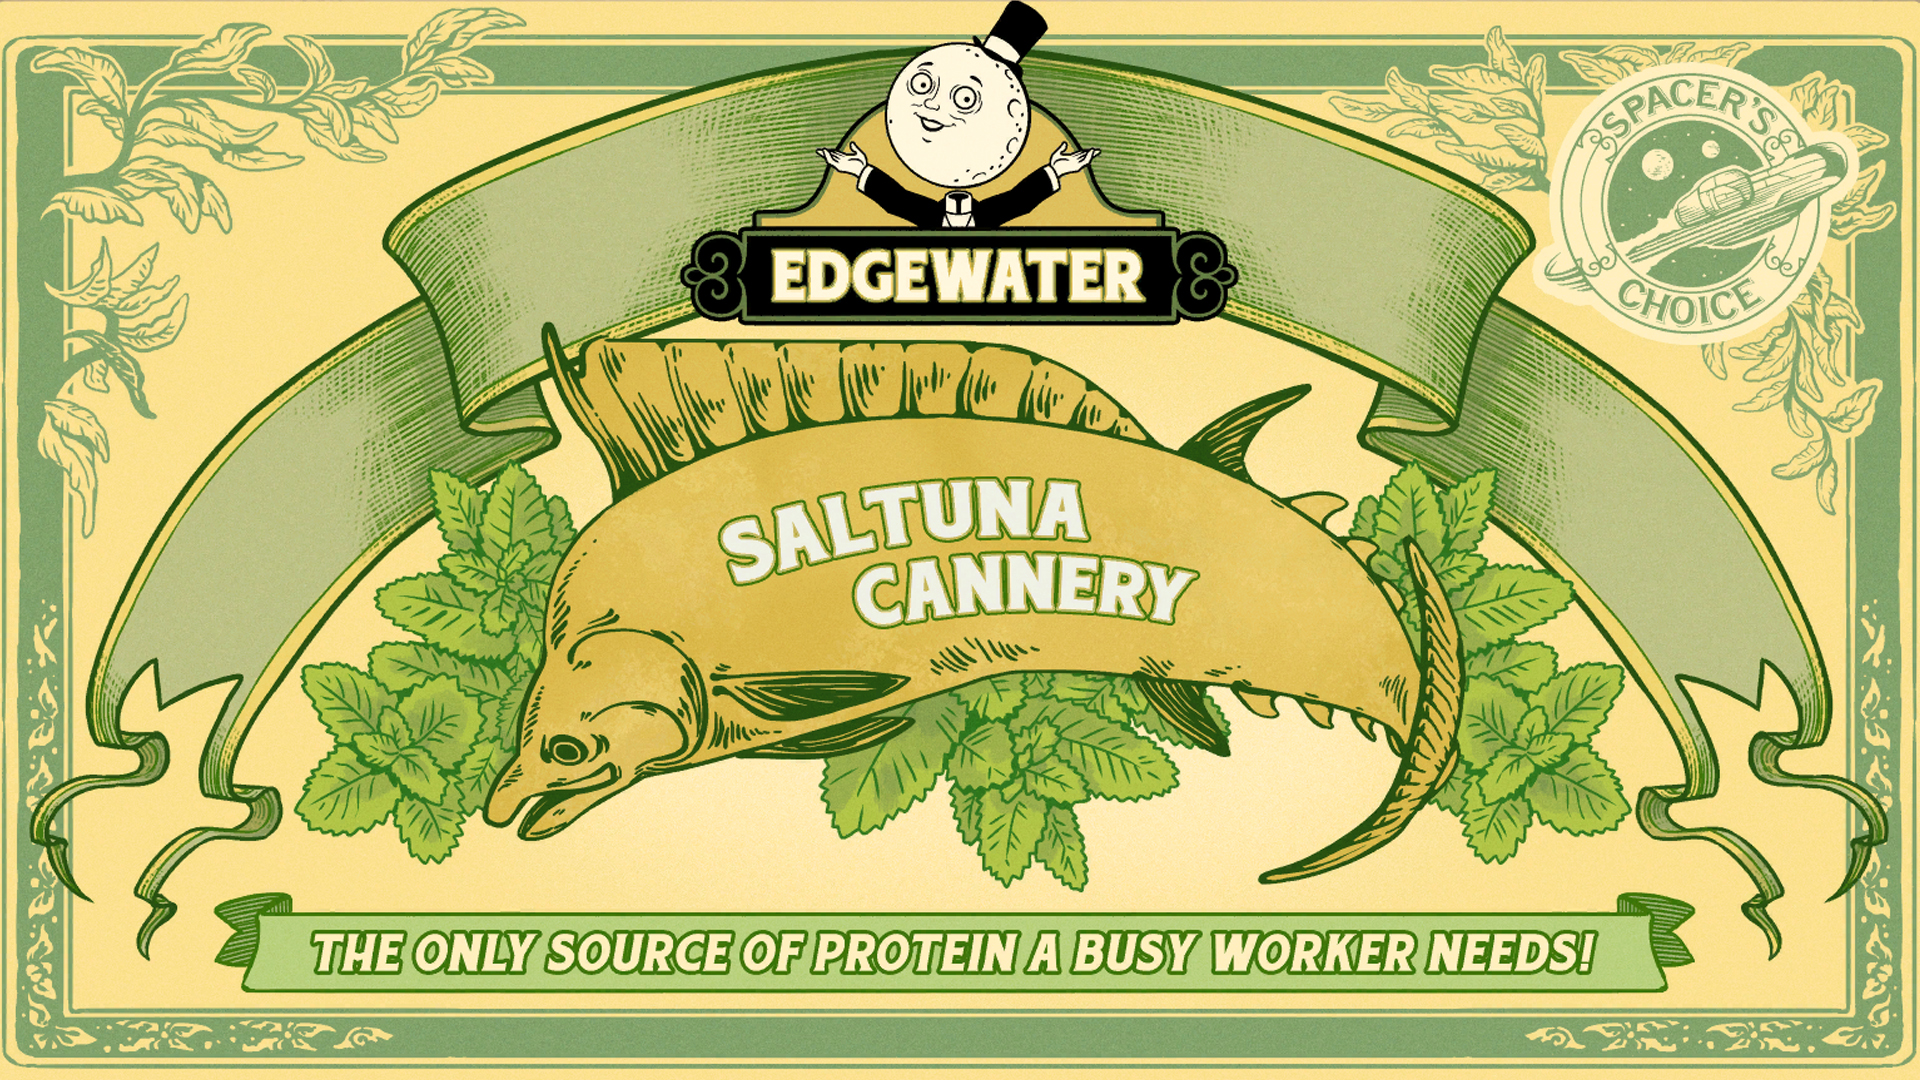 edgewater outer worlds - 10. @ Spacer Edgewater Choice Saltuna Cannery The Only Source Of Protein A Busy Worker Needs!